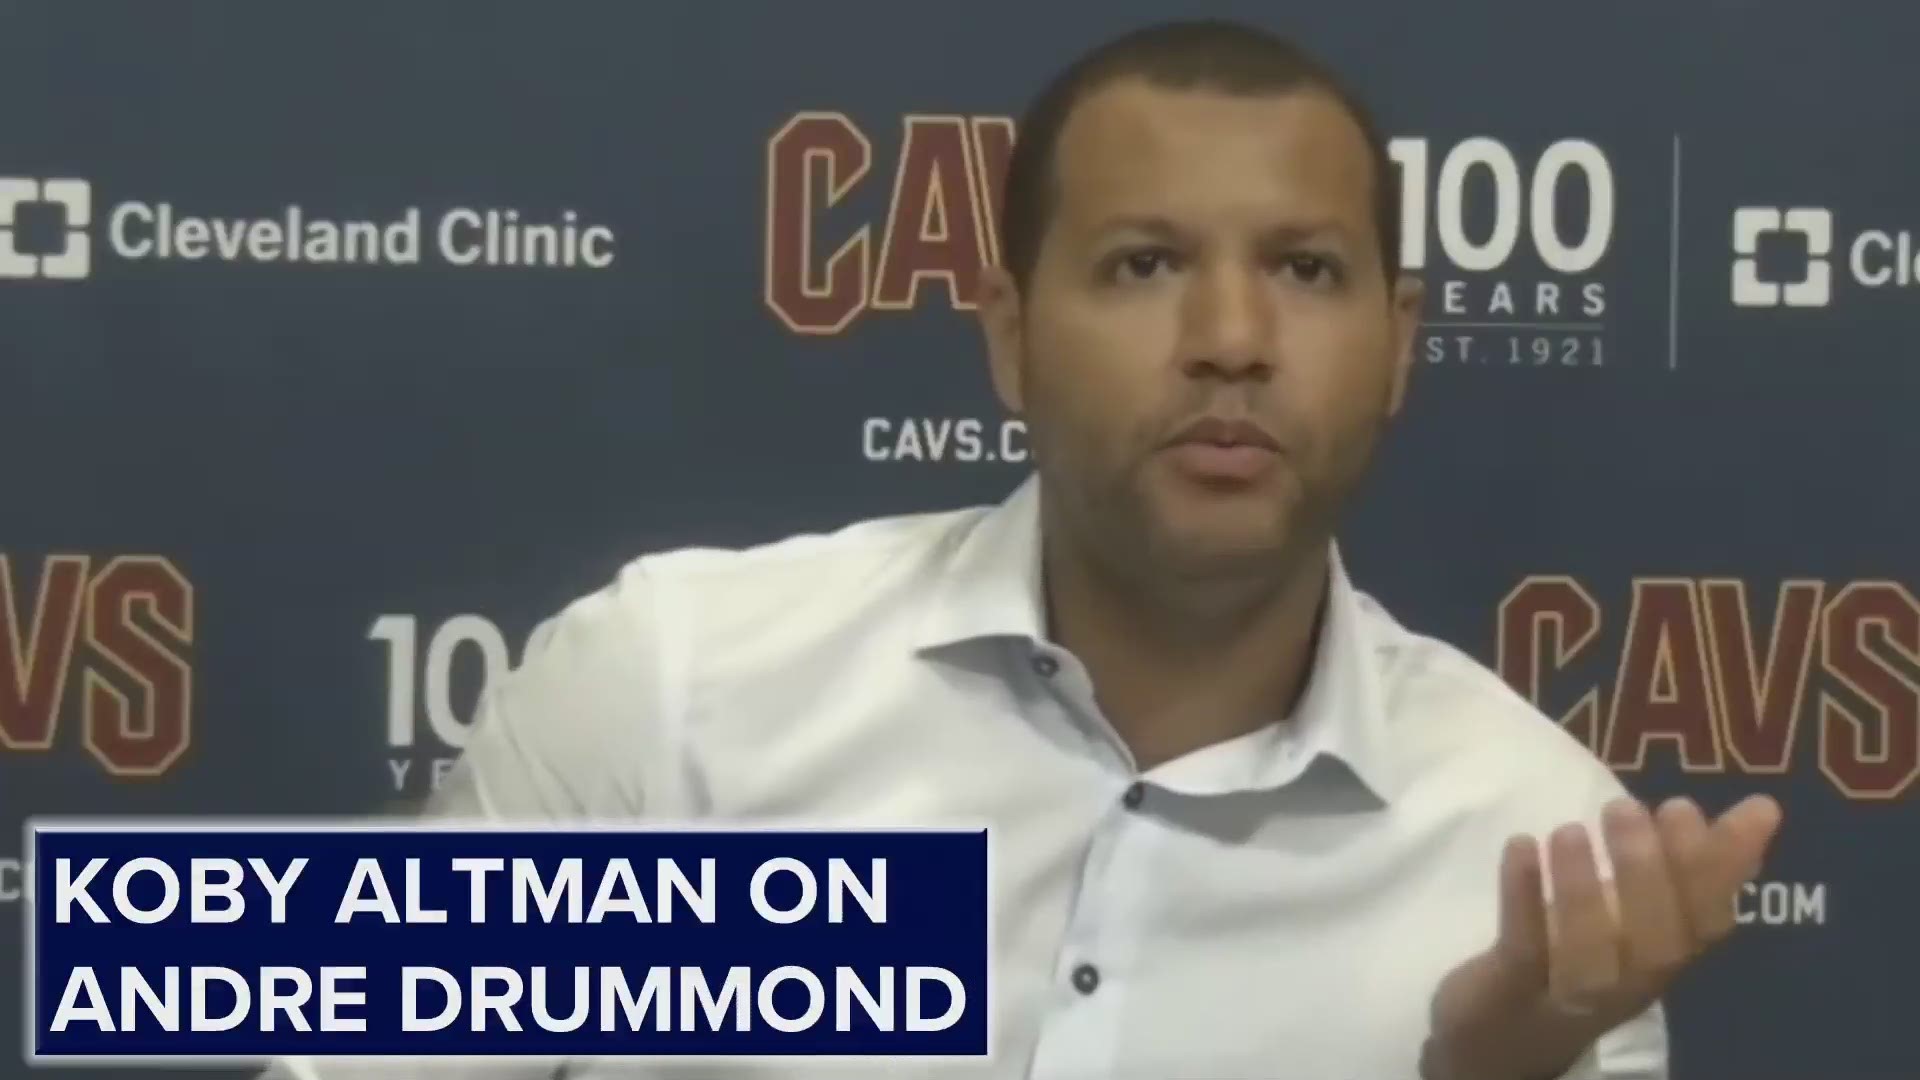 Cavs General Manager Kobe Altman discusses what happened with Andre Drummond.